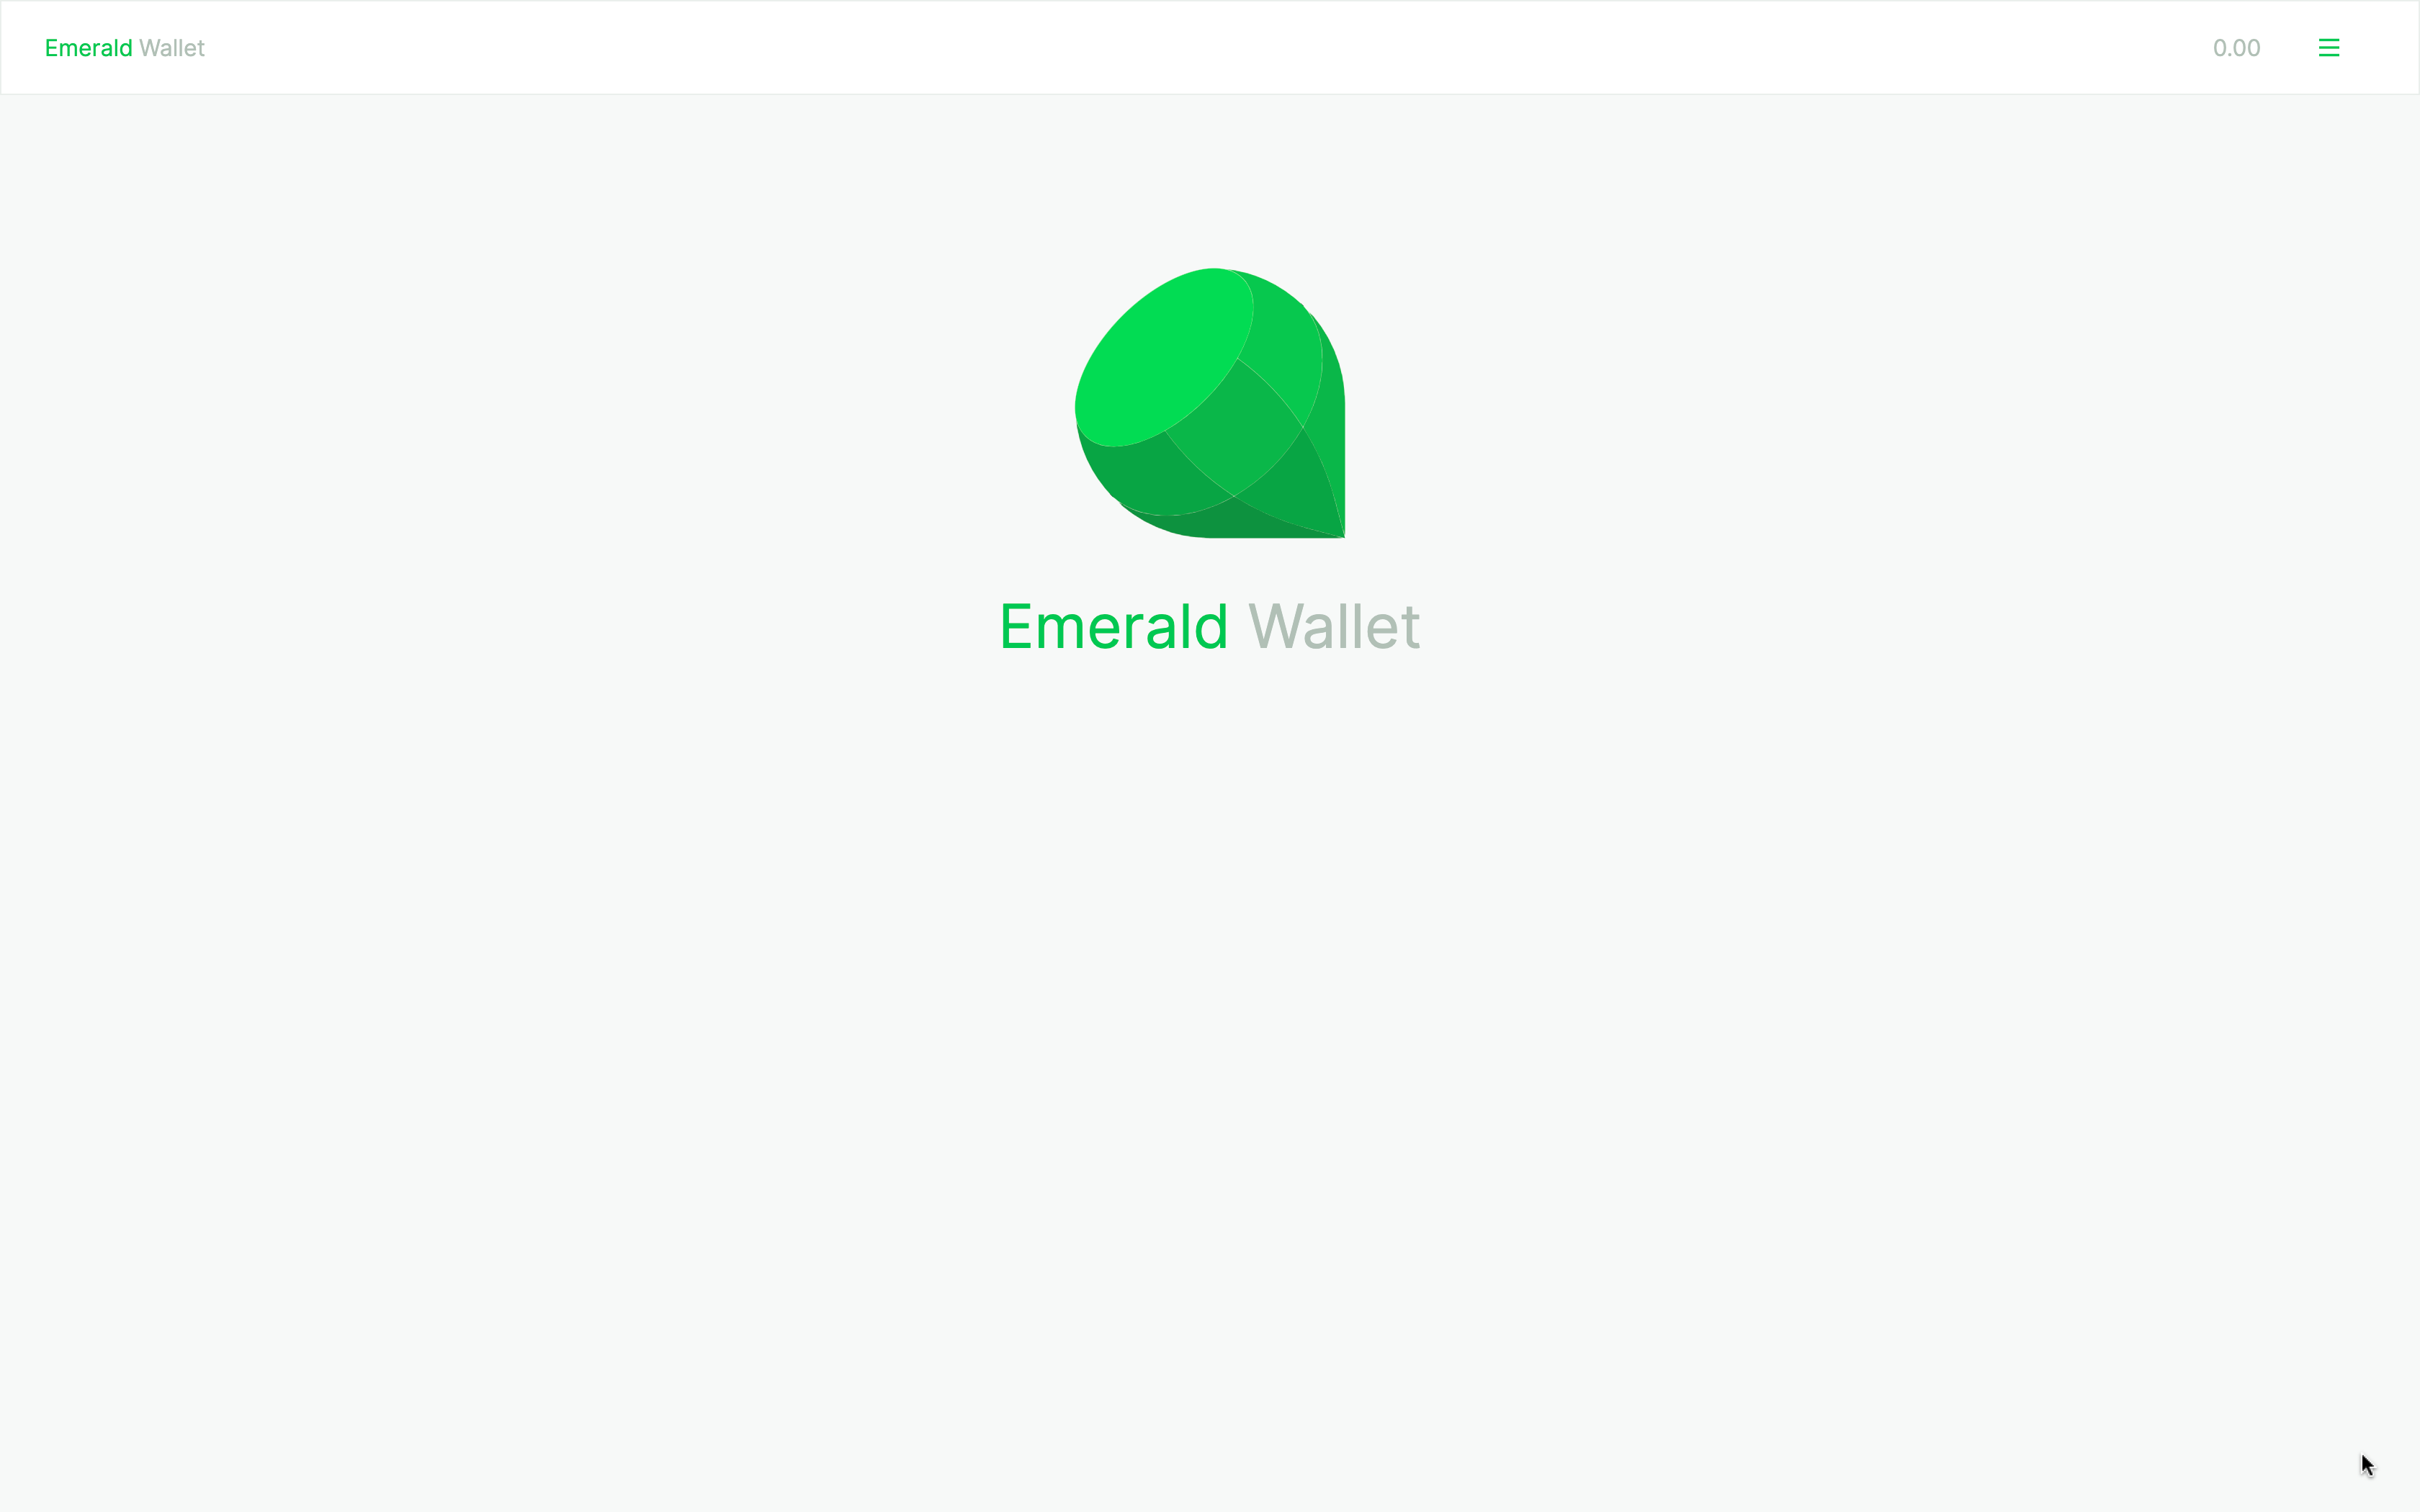 Download Emerald and open it.